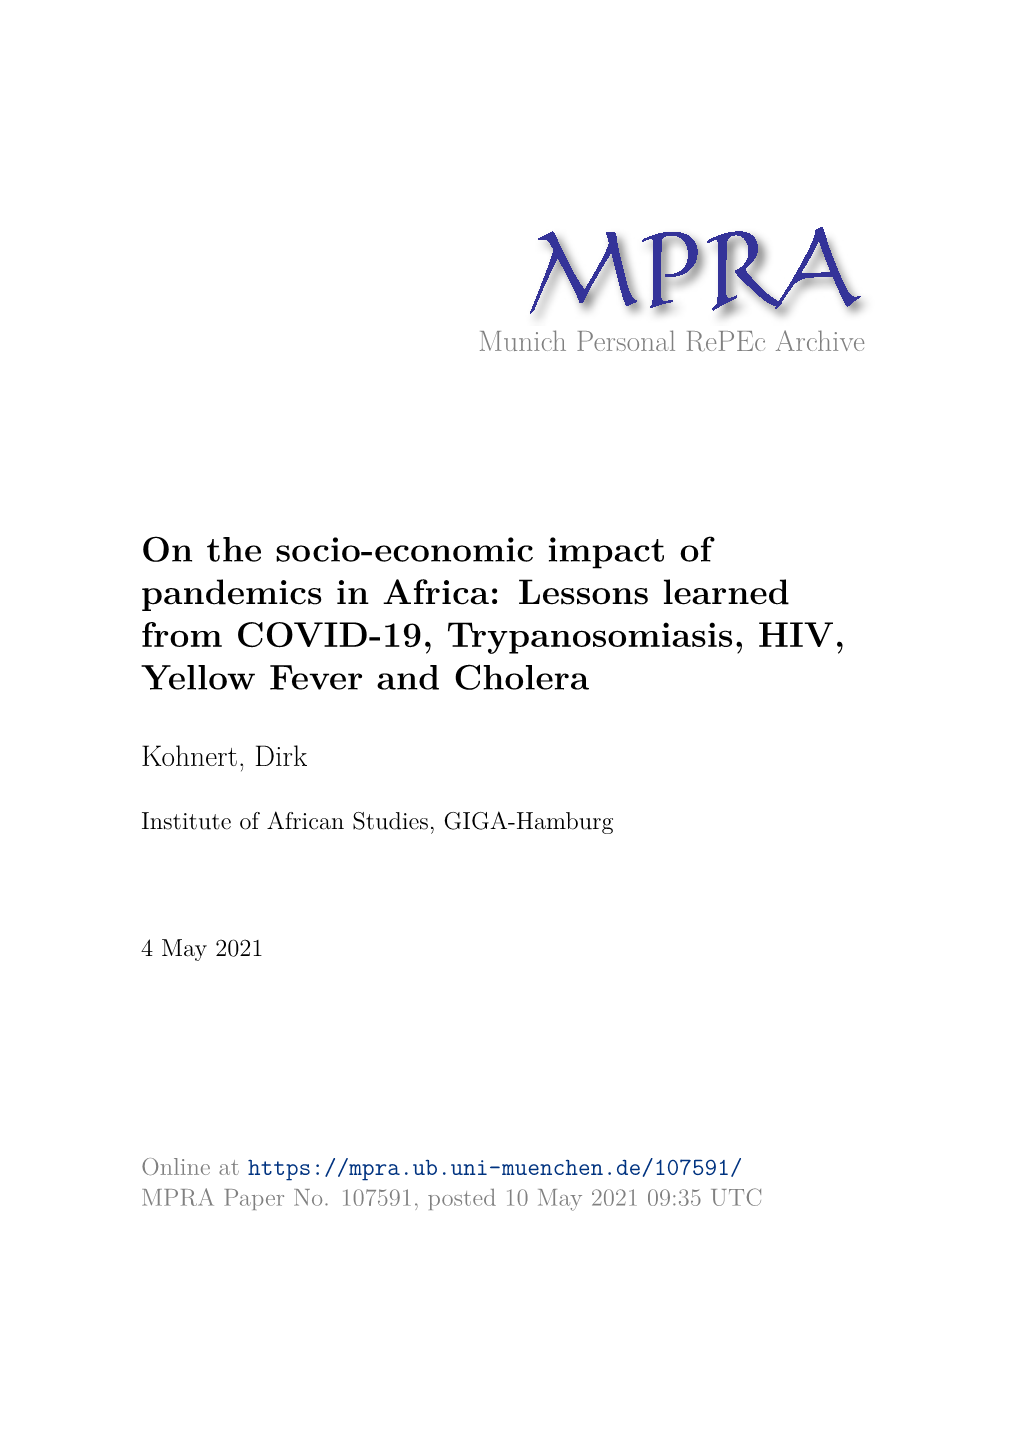 On the Socio-Economic Impact of Pandemics in Africa: Lessons Learned from COVID-19, Trypanosomiasis, HIV, Yellow Fever and Cholera